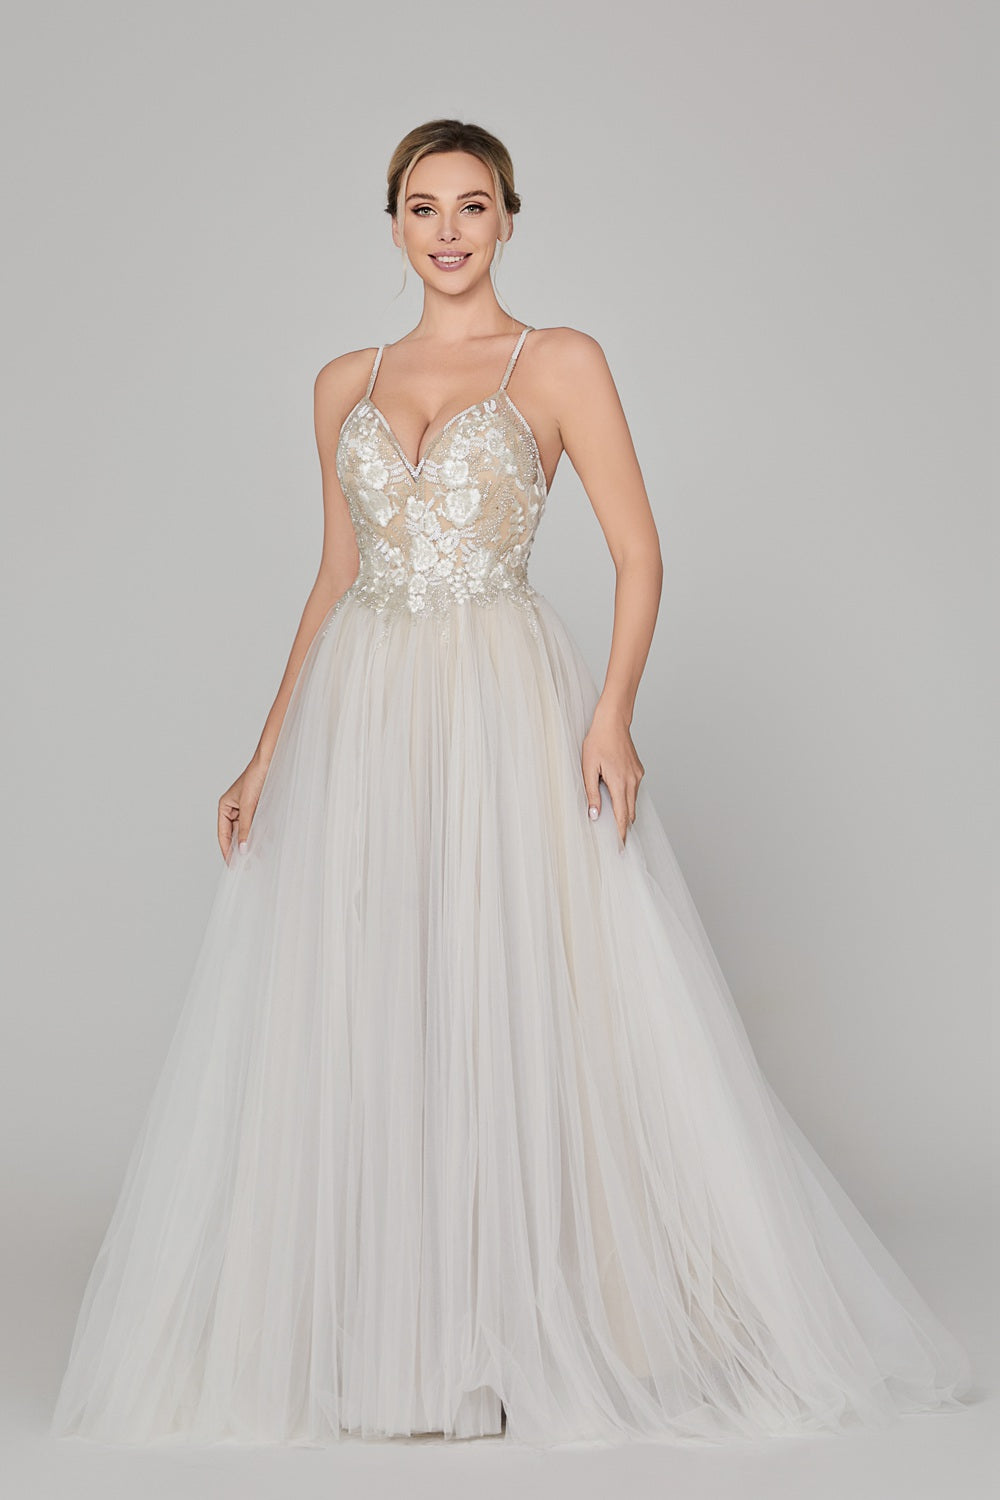 Lace Petal and Tulle Wedding Gown - A Floral Fantasy 32850